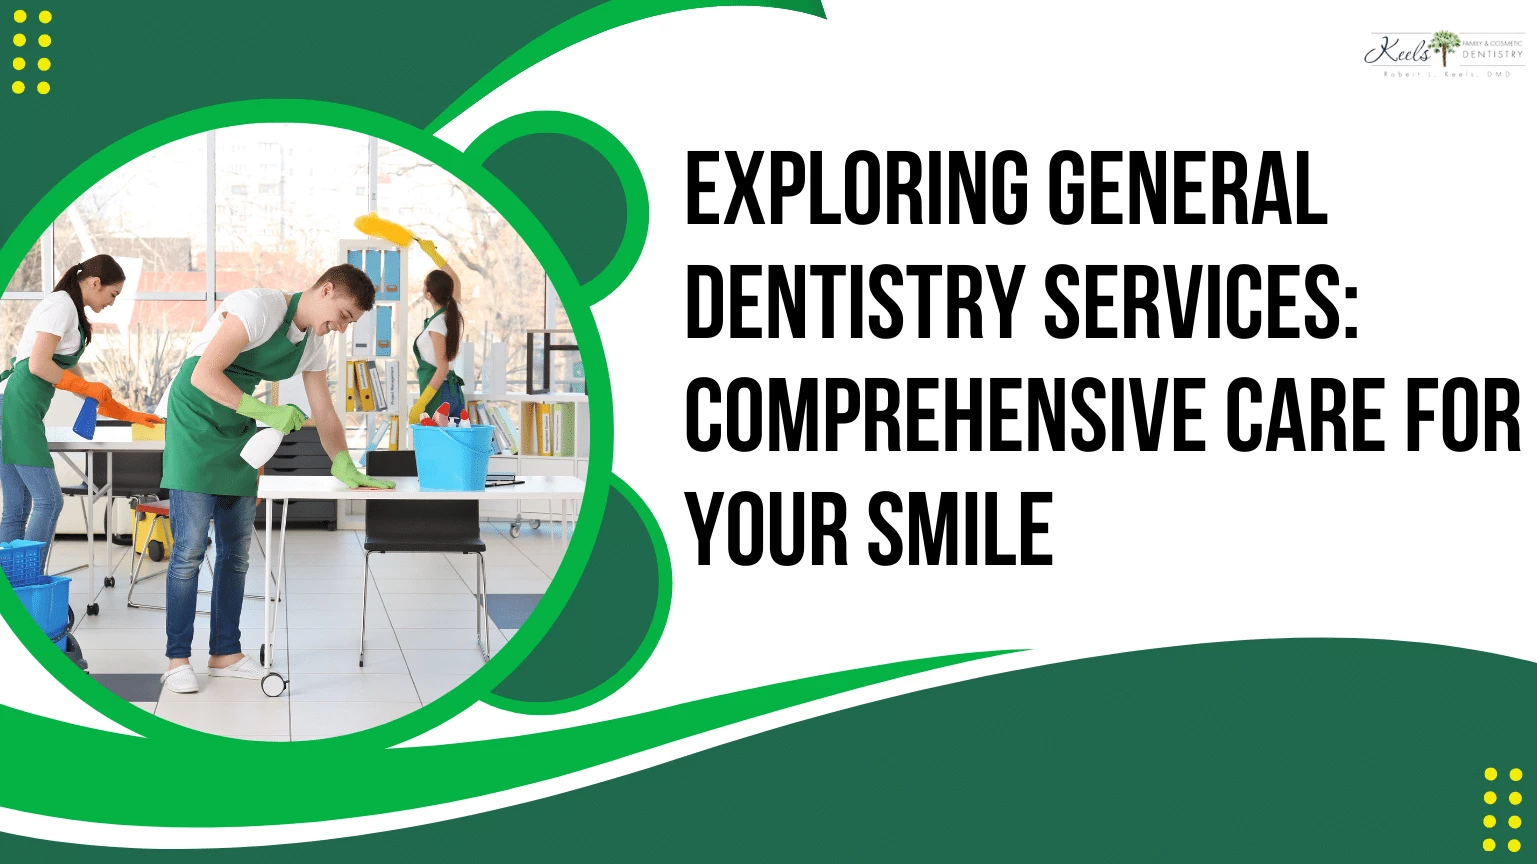 Exploring General Dentistry Services Comprehensive Care for Your Smile